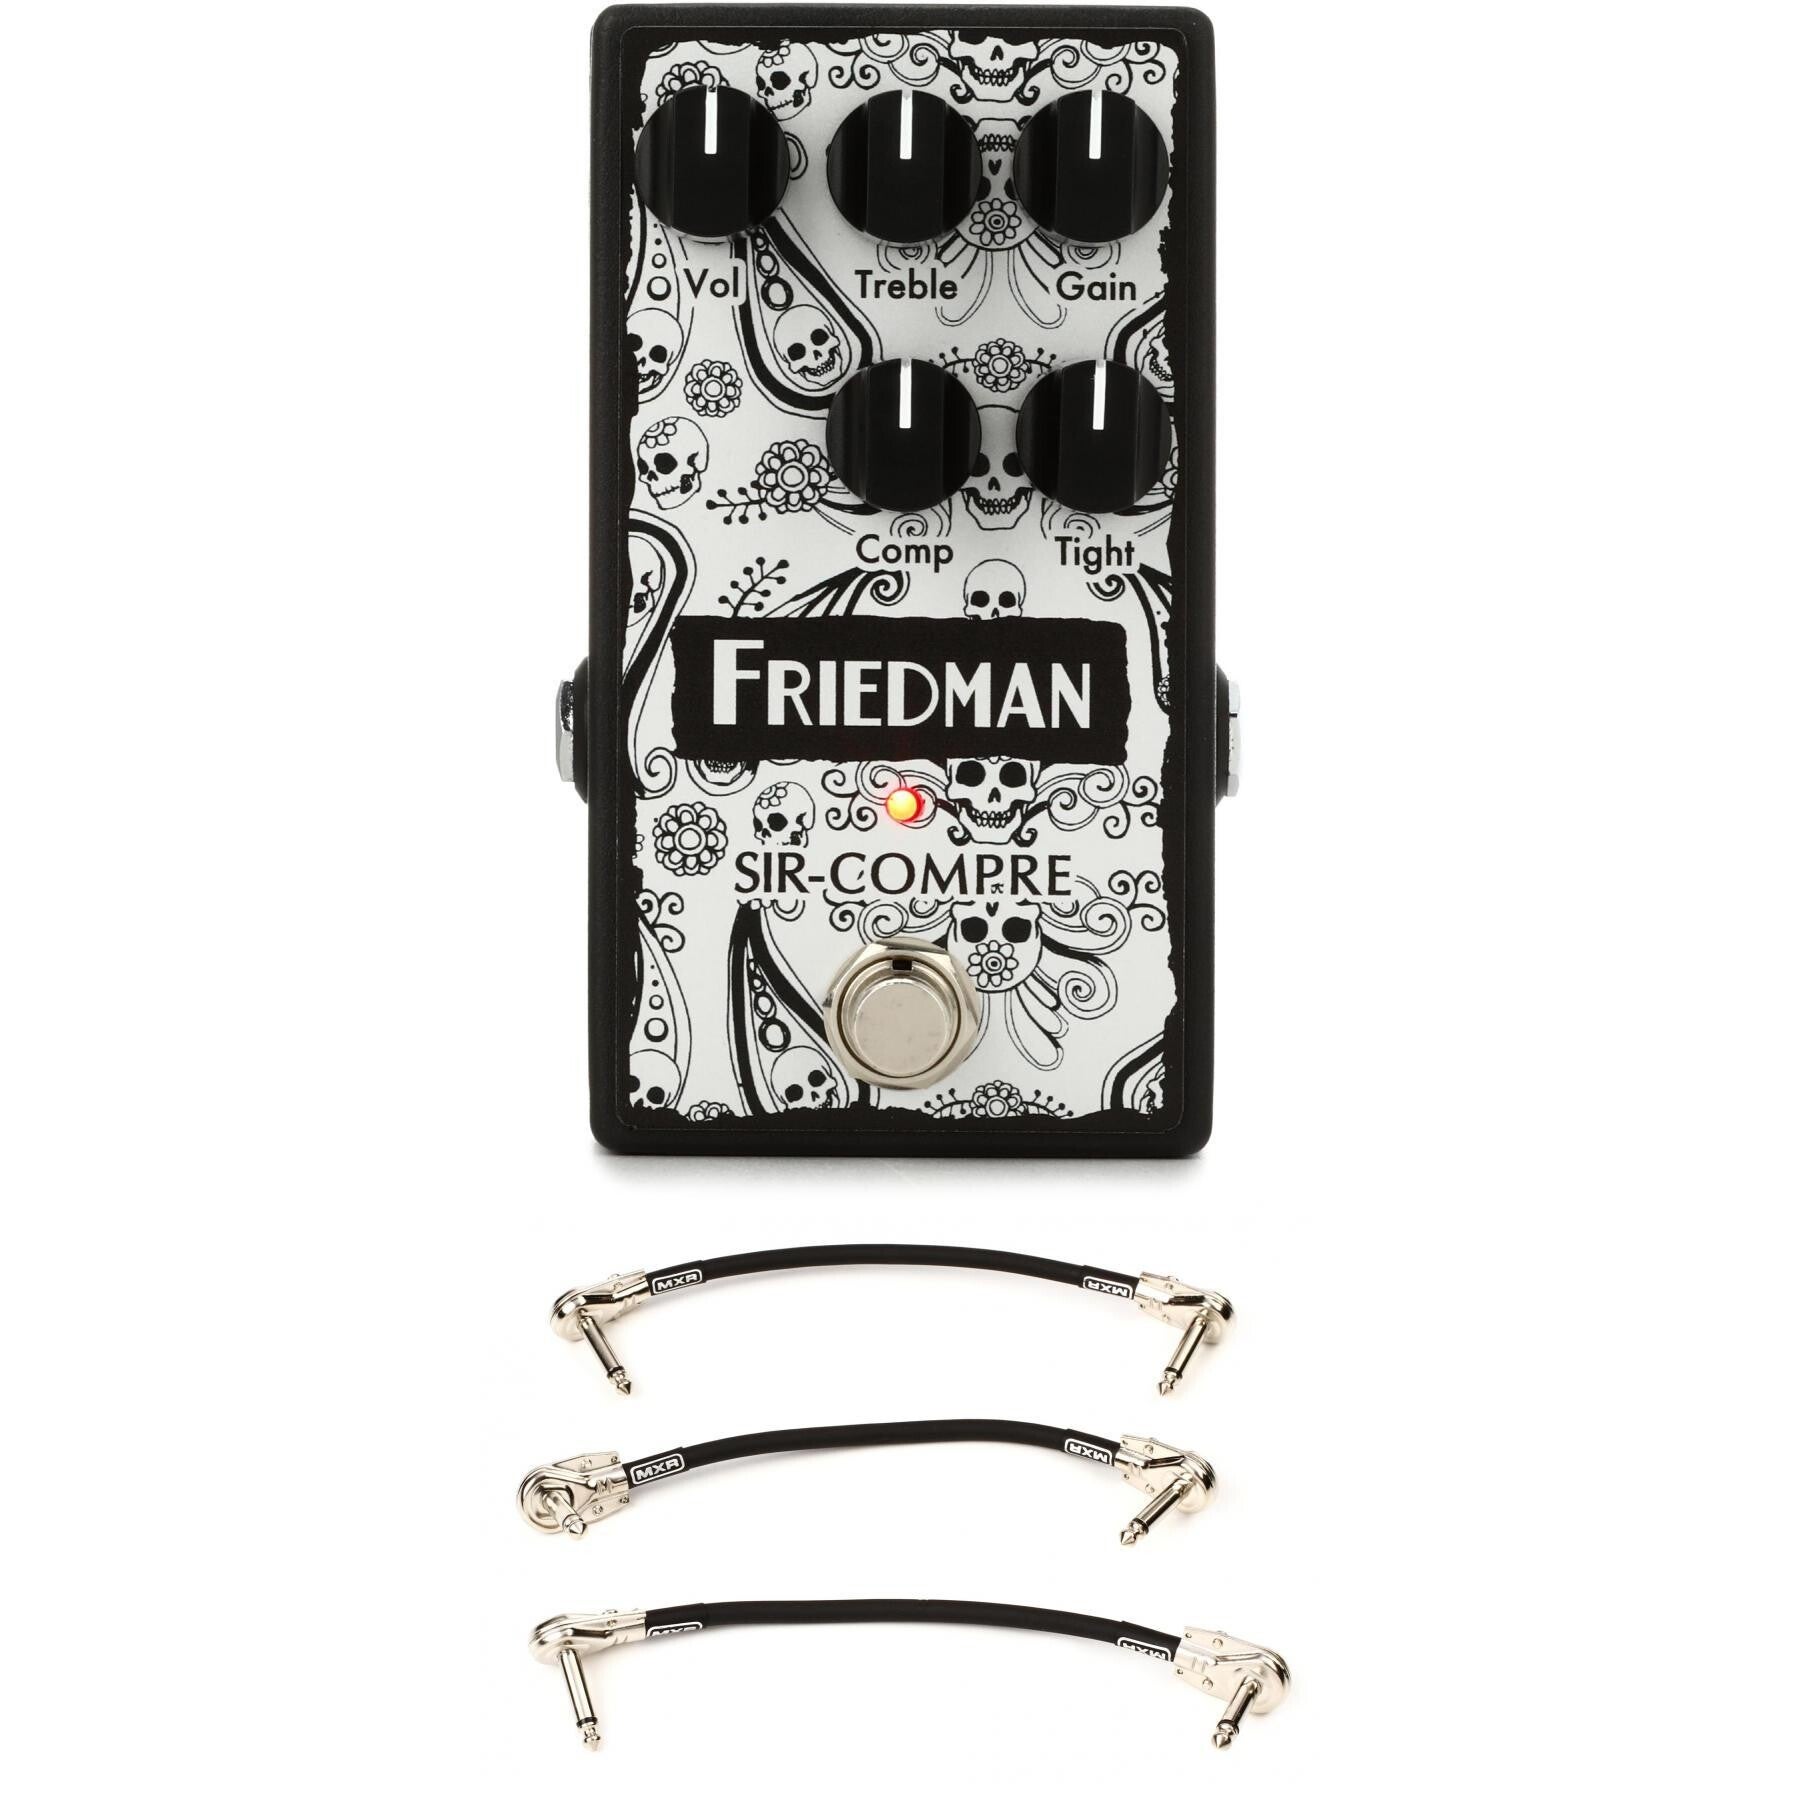 Friedman Sir Compre LTD Compressor Pedal with Overdrive with 3 Patch Cables  - Artisan Edition Sweetwater Exclusive